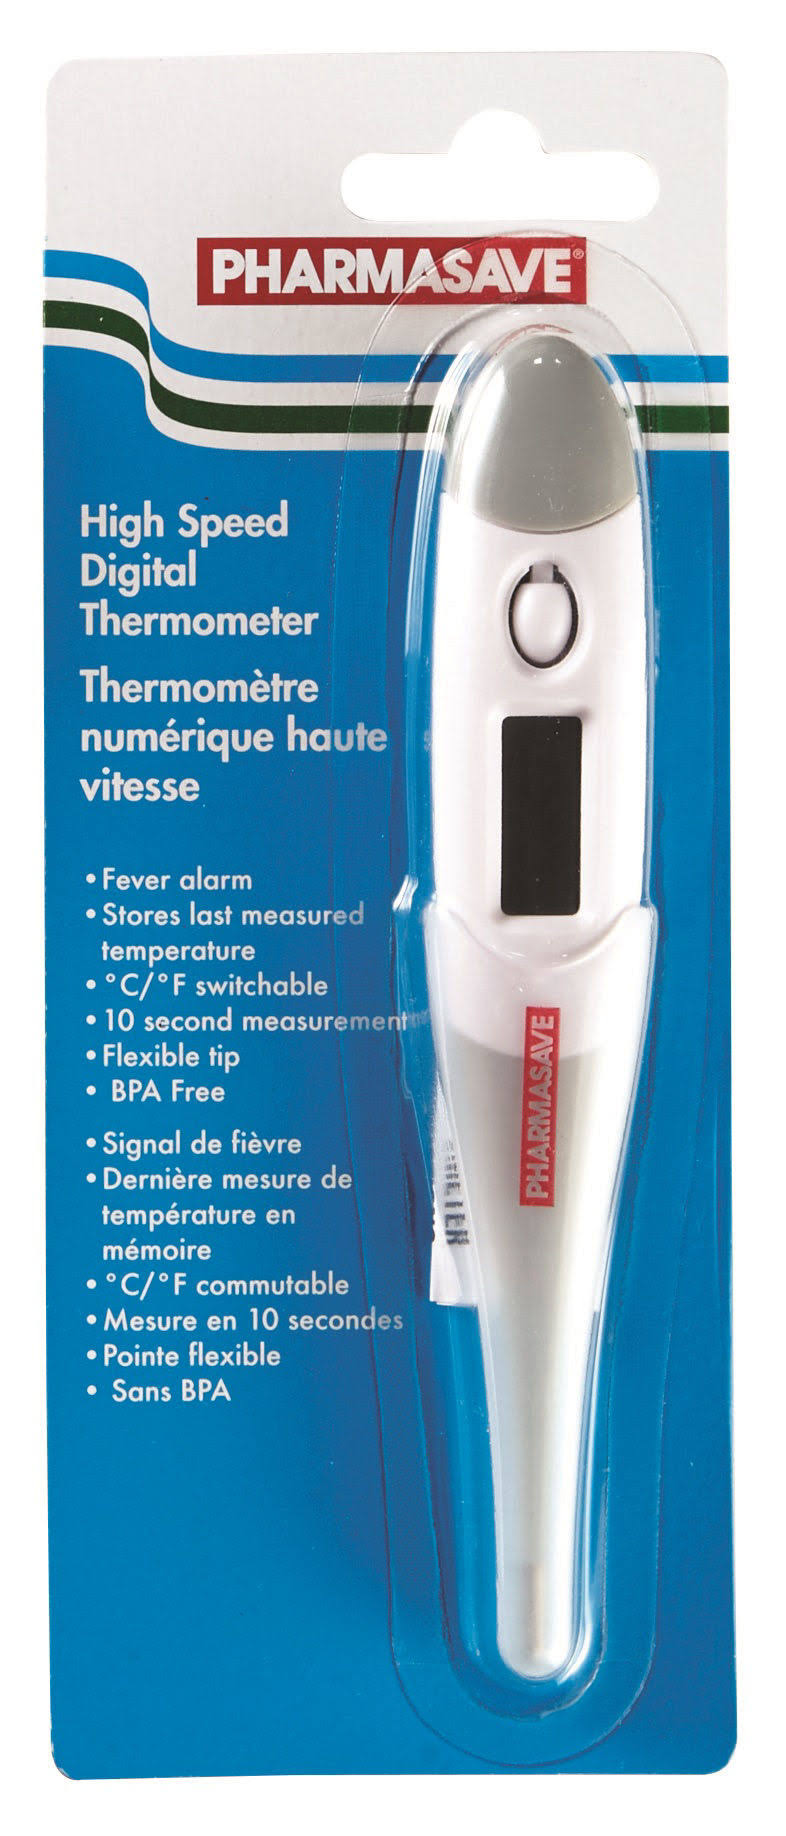 PHARMASAVE HIGH Speed DIGITAL THERMOMETER 10 SECOND